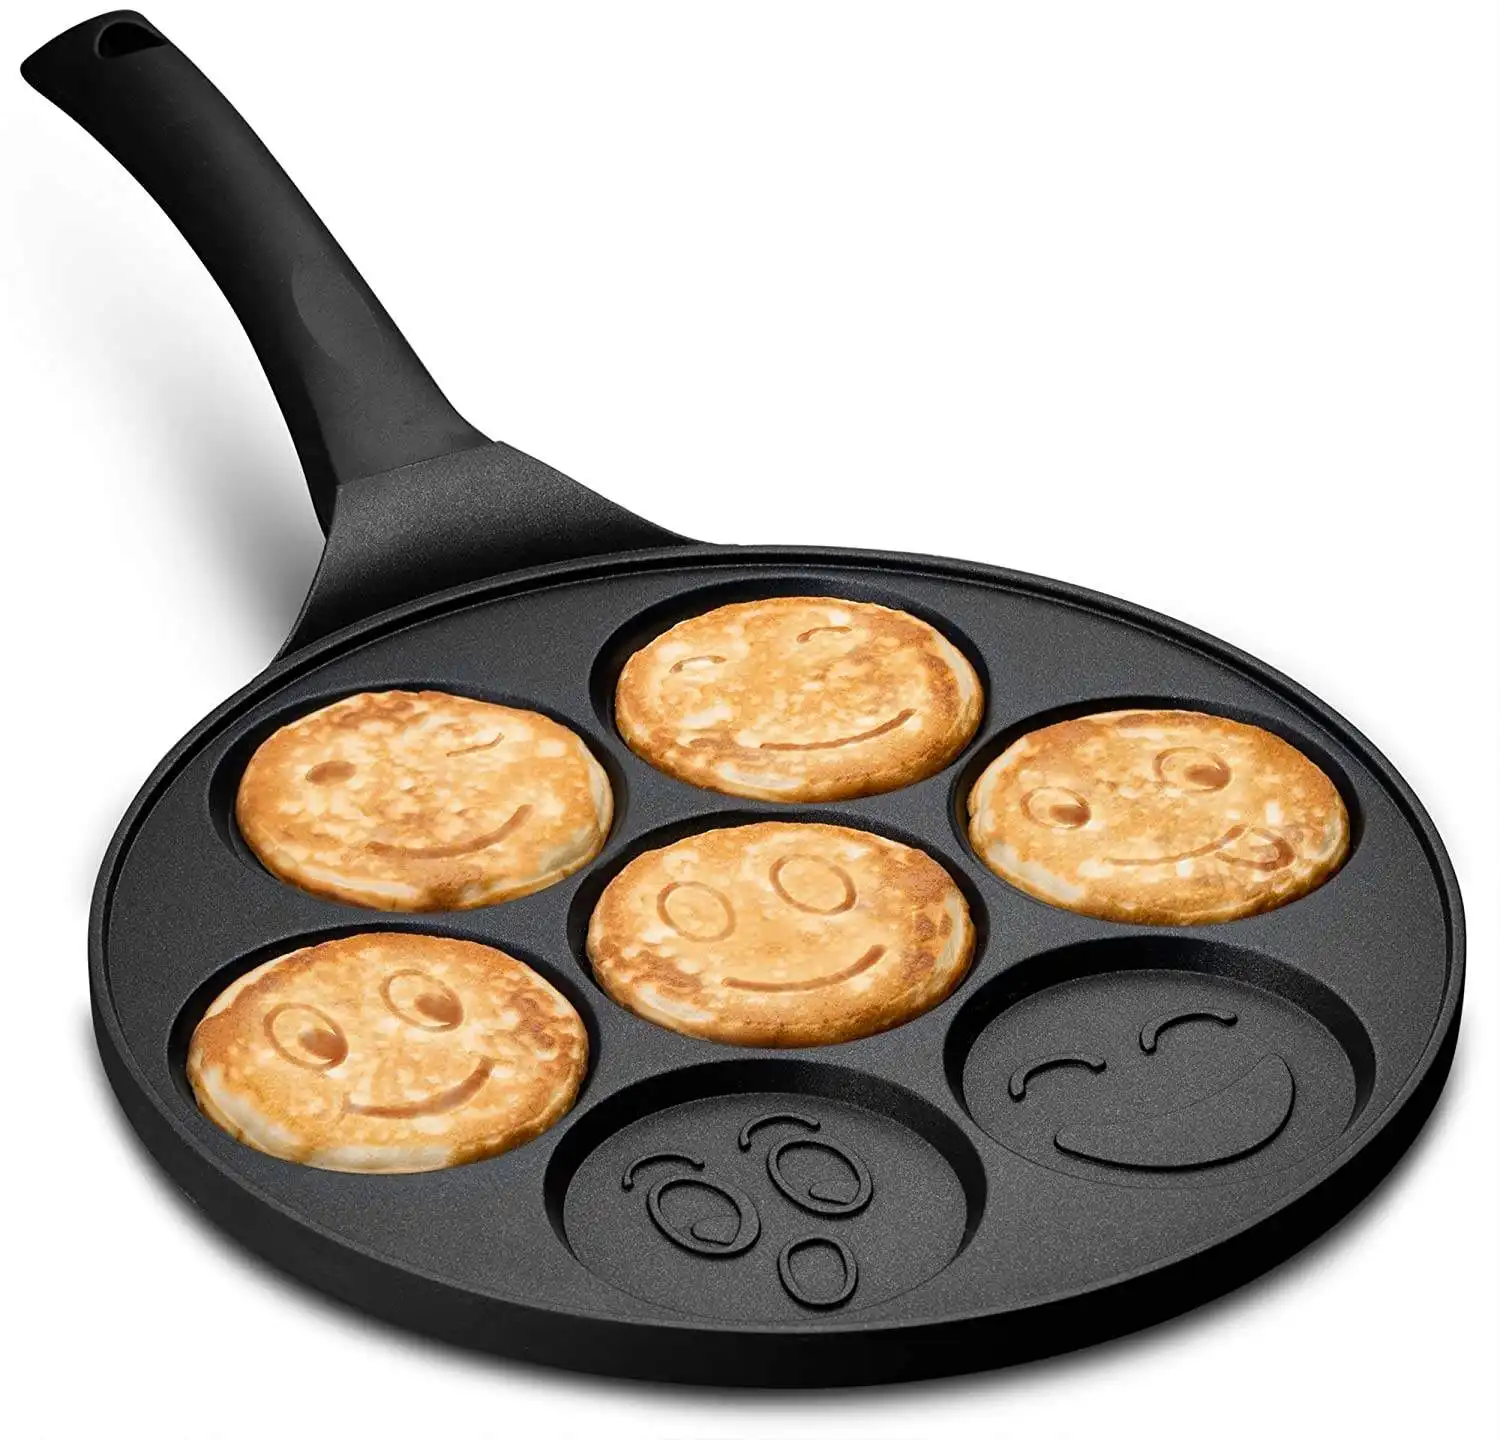 7 holes 27CM Non-stick Pancake Waffle Blinis Maker Frying Pan with Handle Smiley Face Mini Die Cast Non-stick Frying Pan